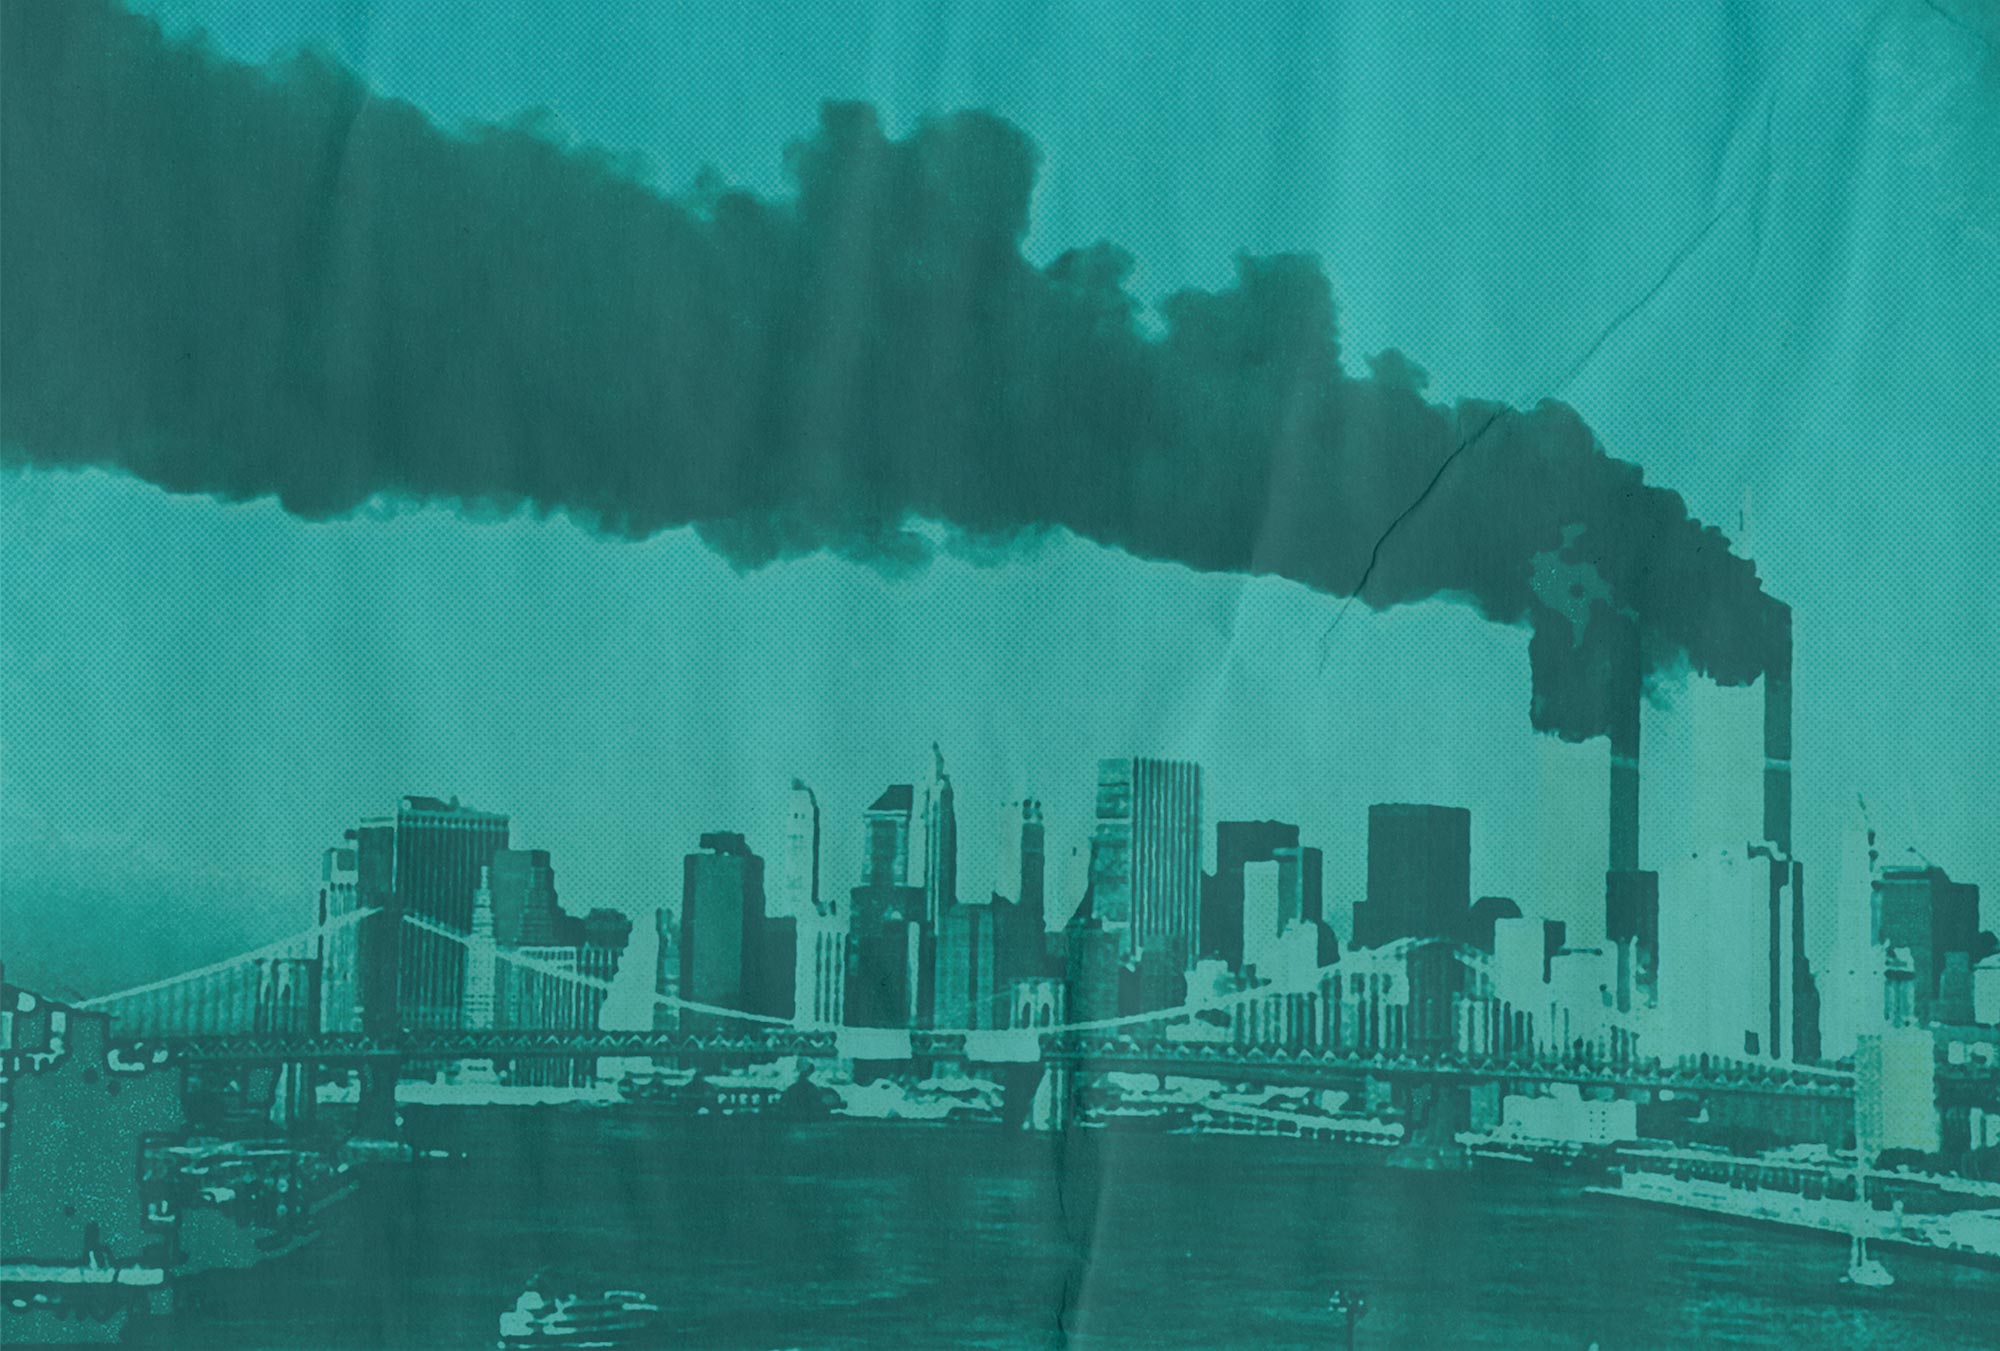 Photo of the September 11th attacks on the World Trade center with a teal overlay and printed effects.